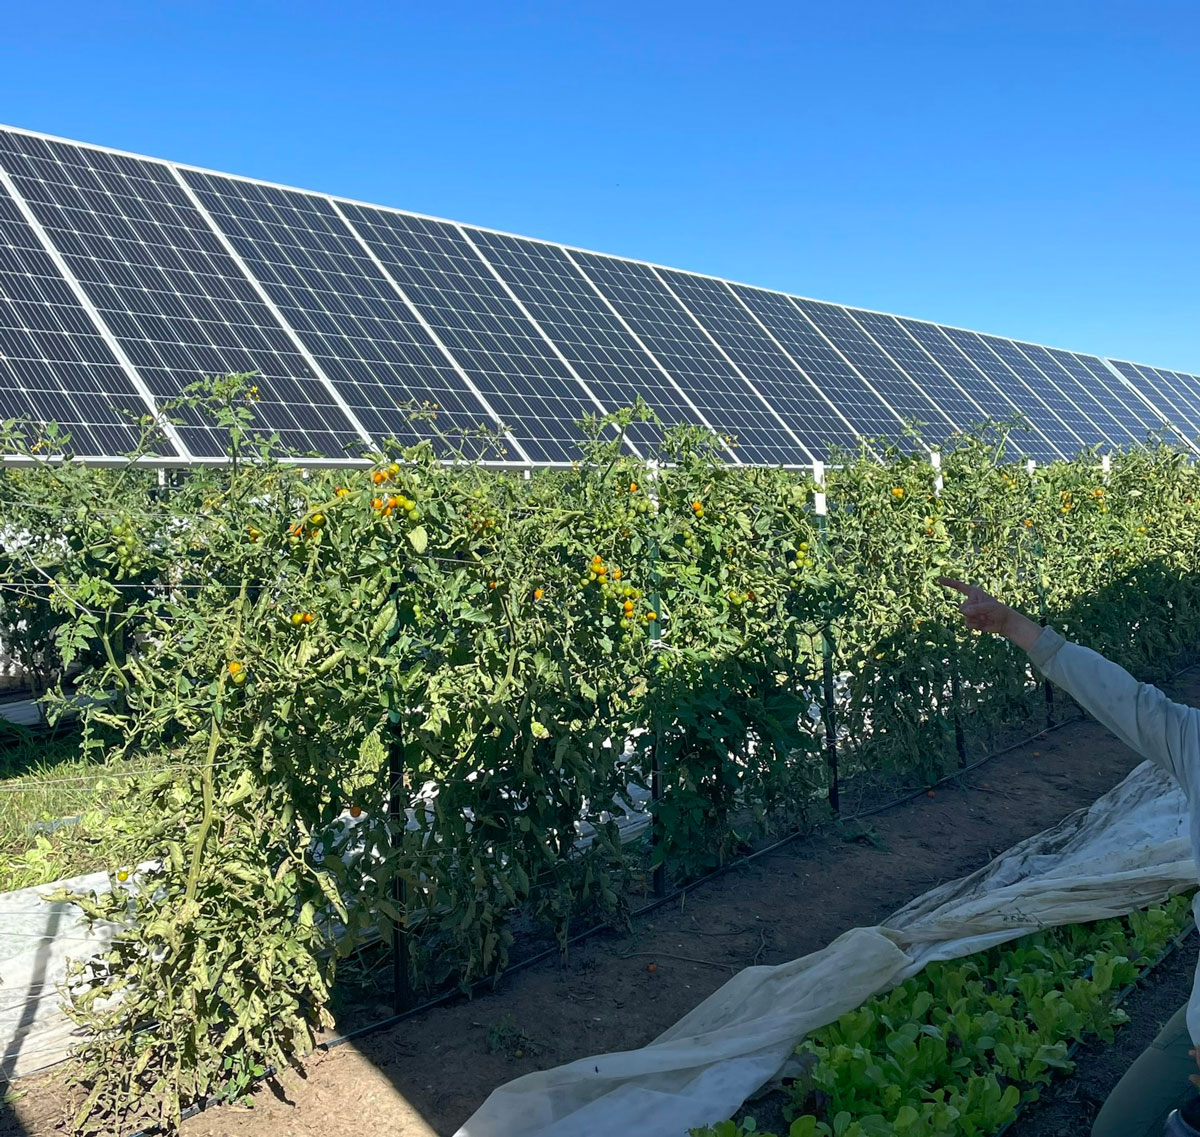 A row of solar photovoltaic panels with bushy tomato plants in front of them (solar power)